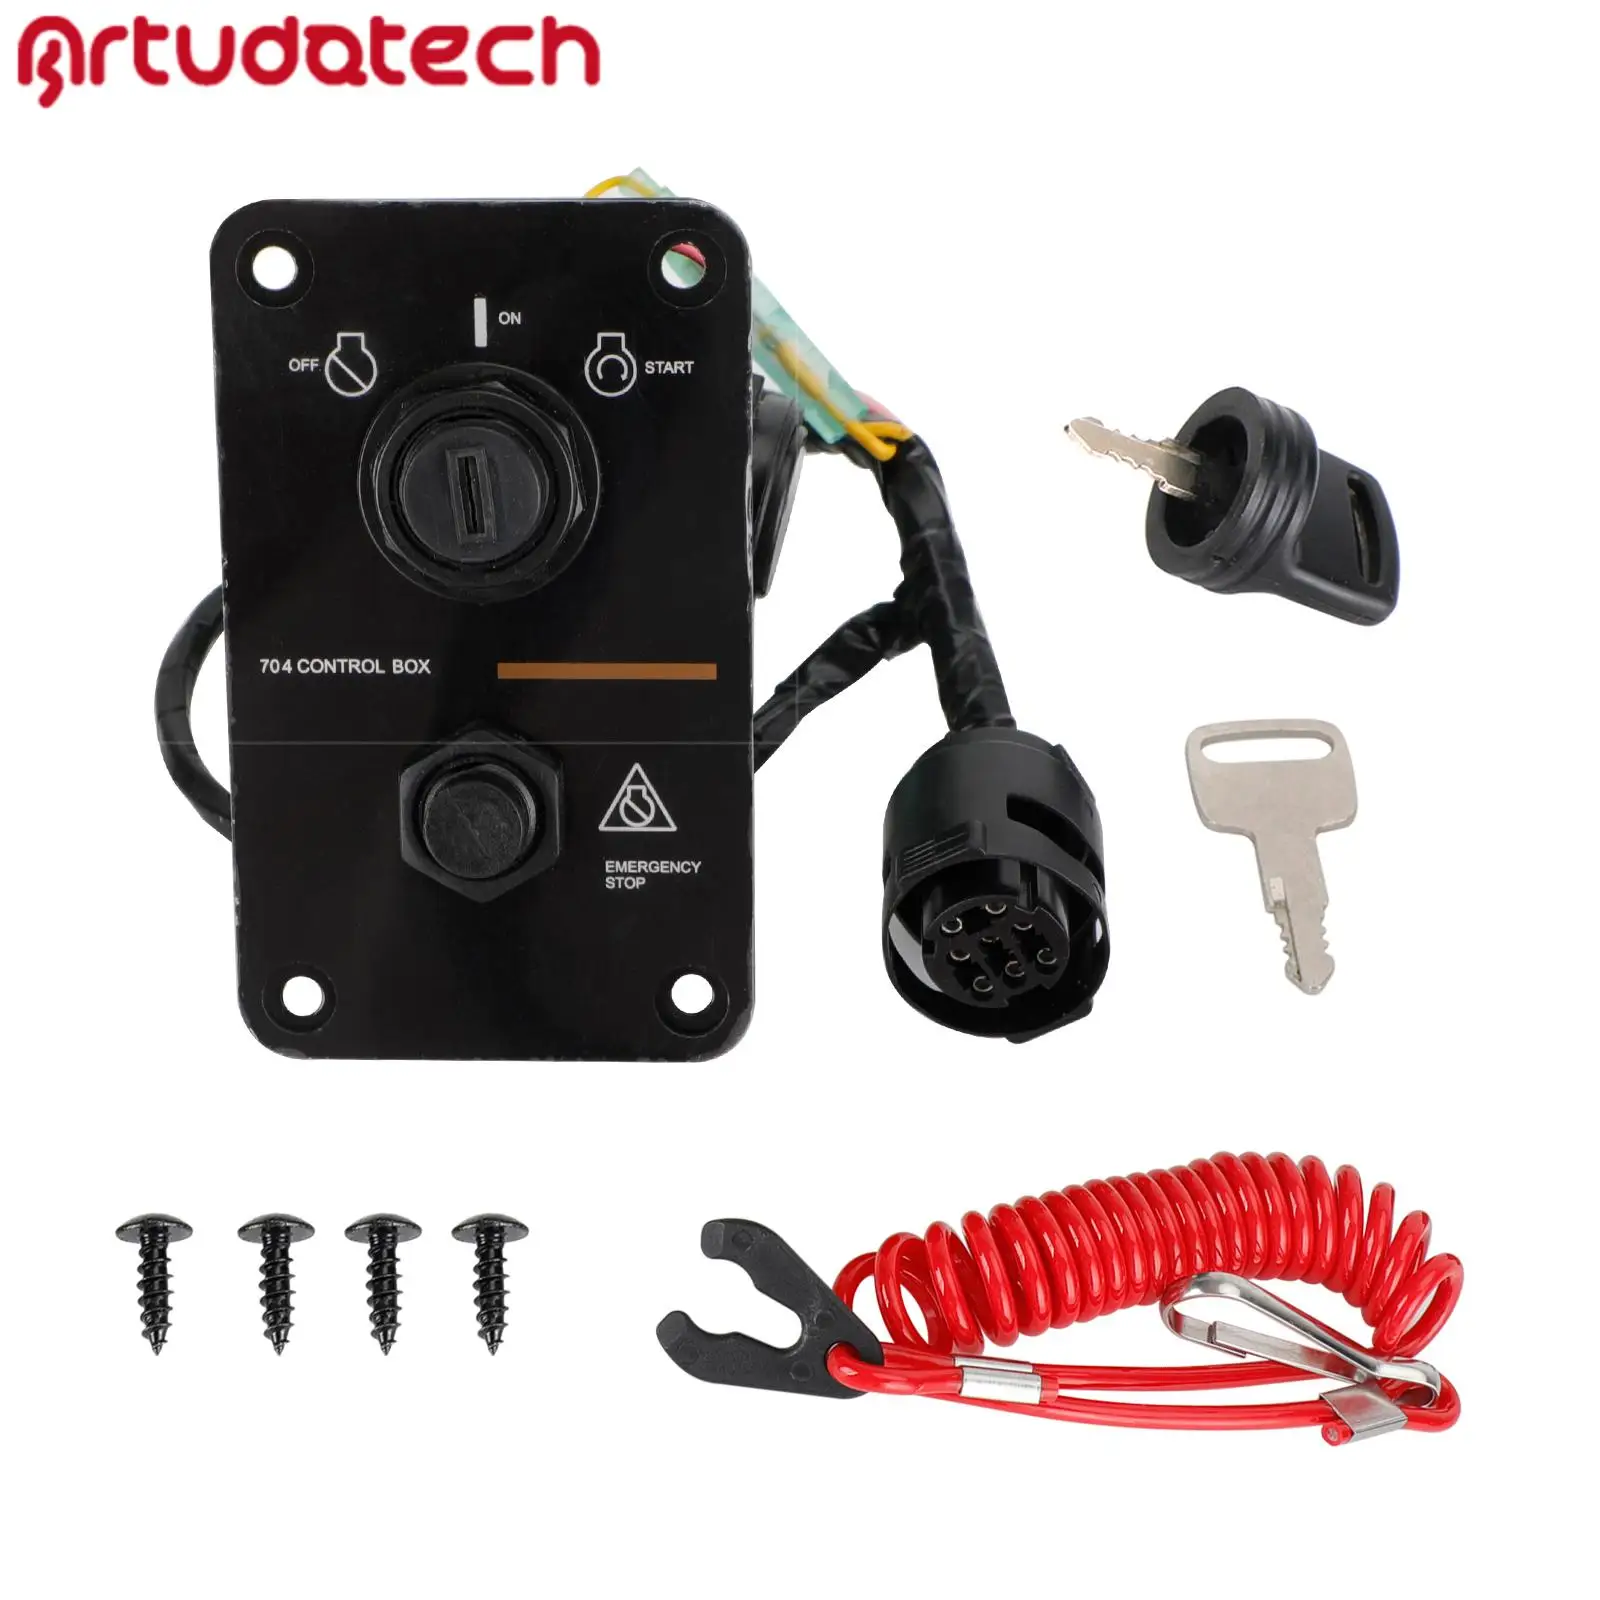 Artudatech Outboard  Single Engine Switch Panel fit for Yamaha 2-stroke / 4-stroke 10 Pin 704-82570-08-00 Motorboat Parts